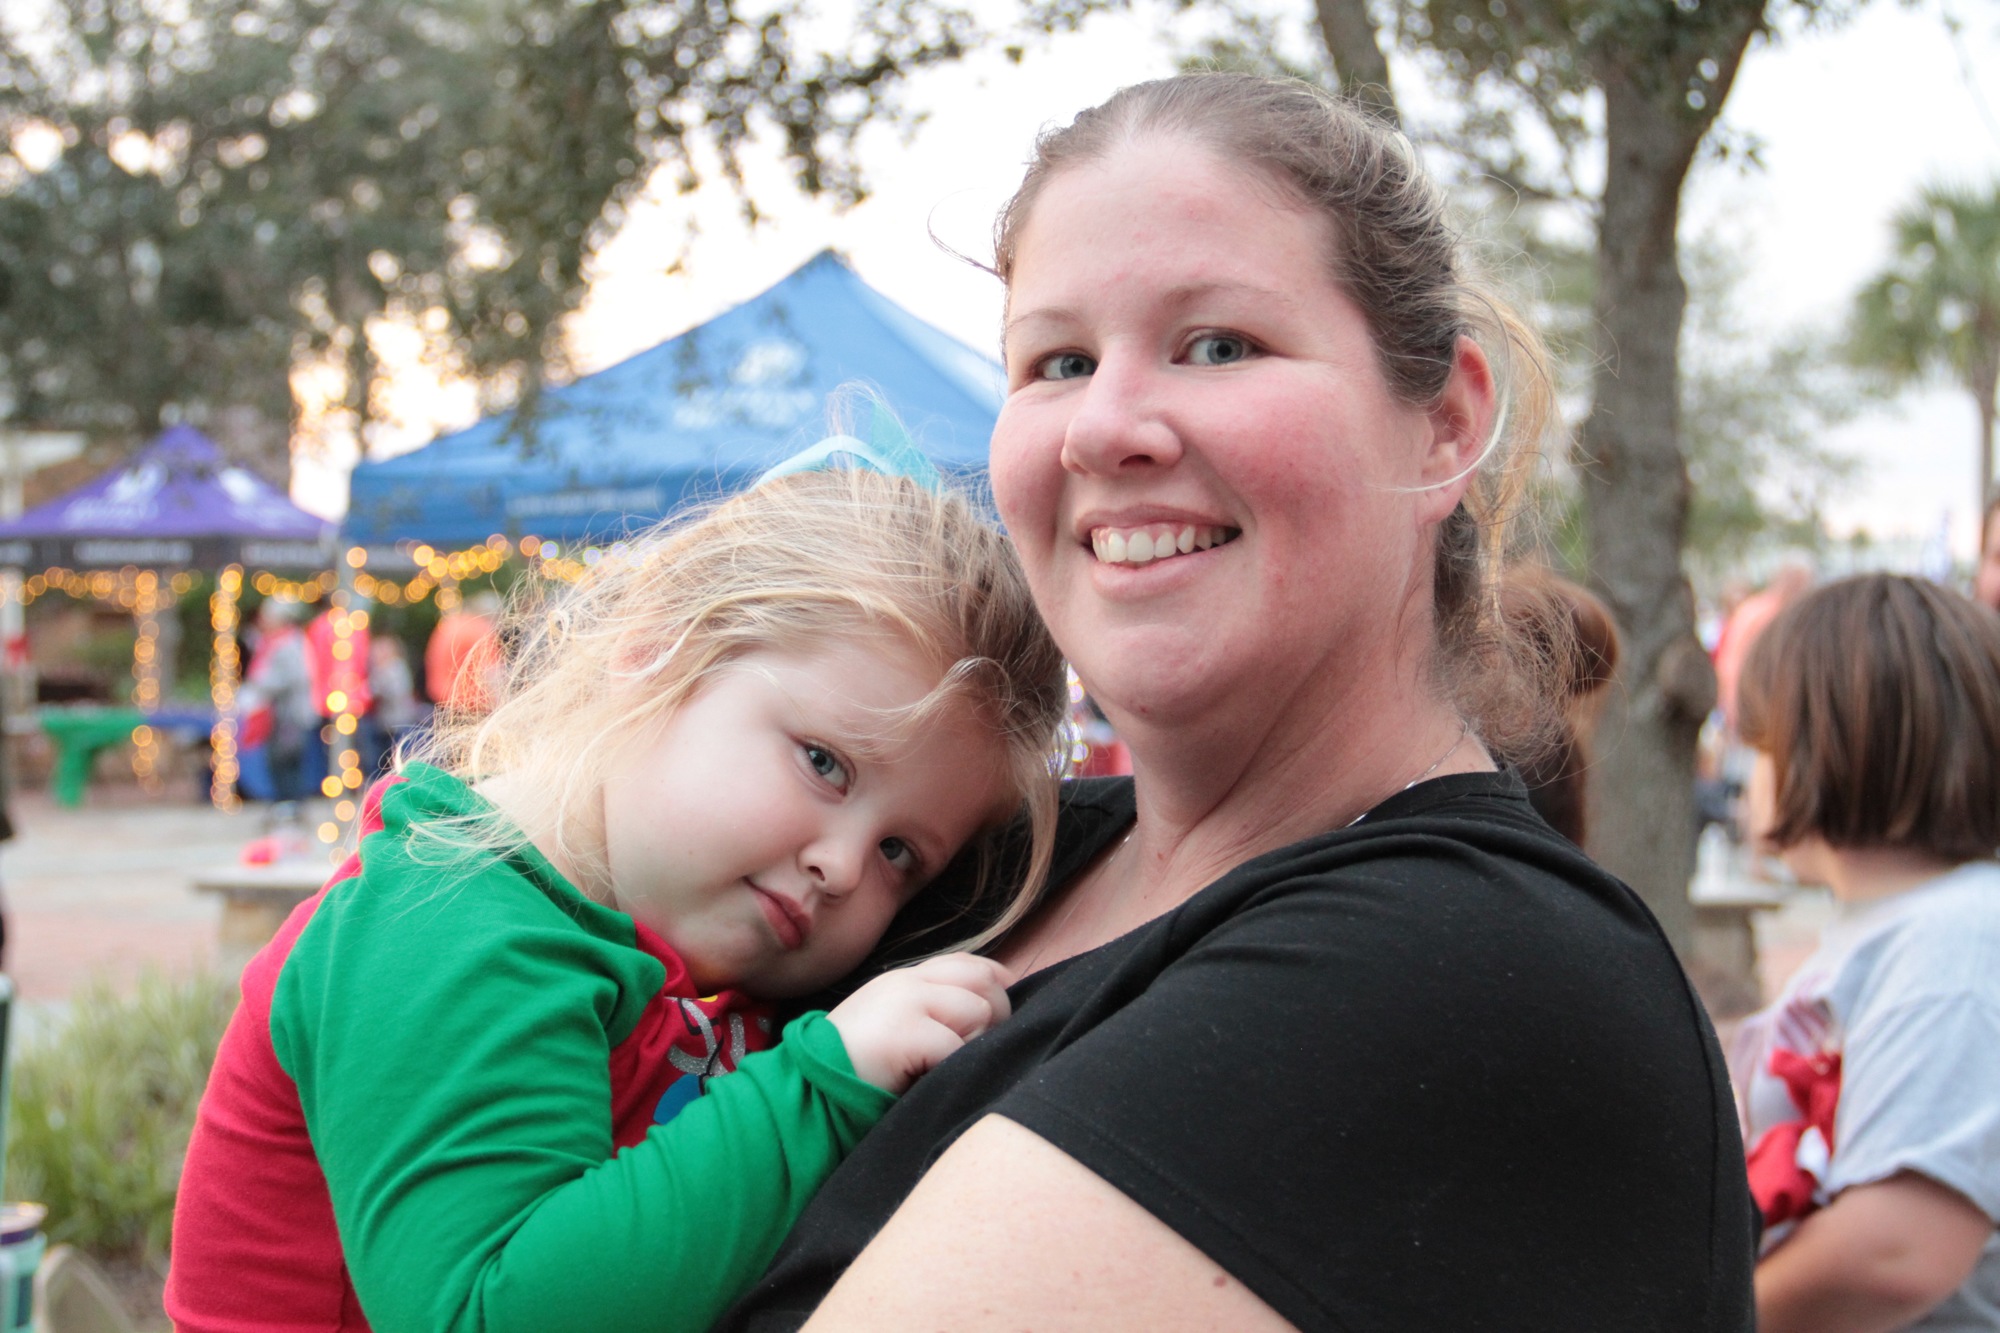 Megan Harvell at the event with her daughter Brielle Harvell. Photo by Nichole Osinski